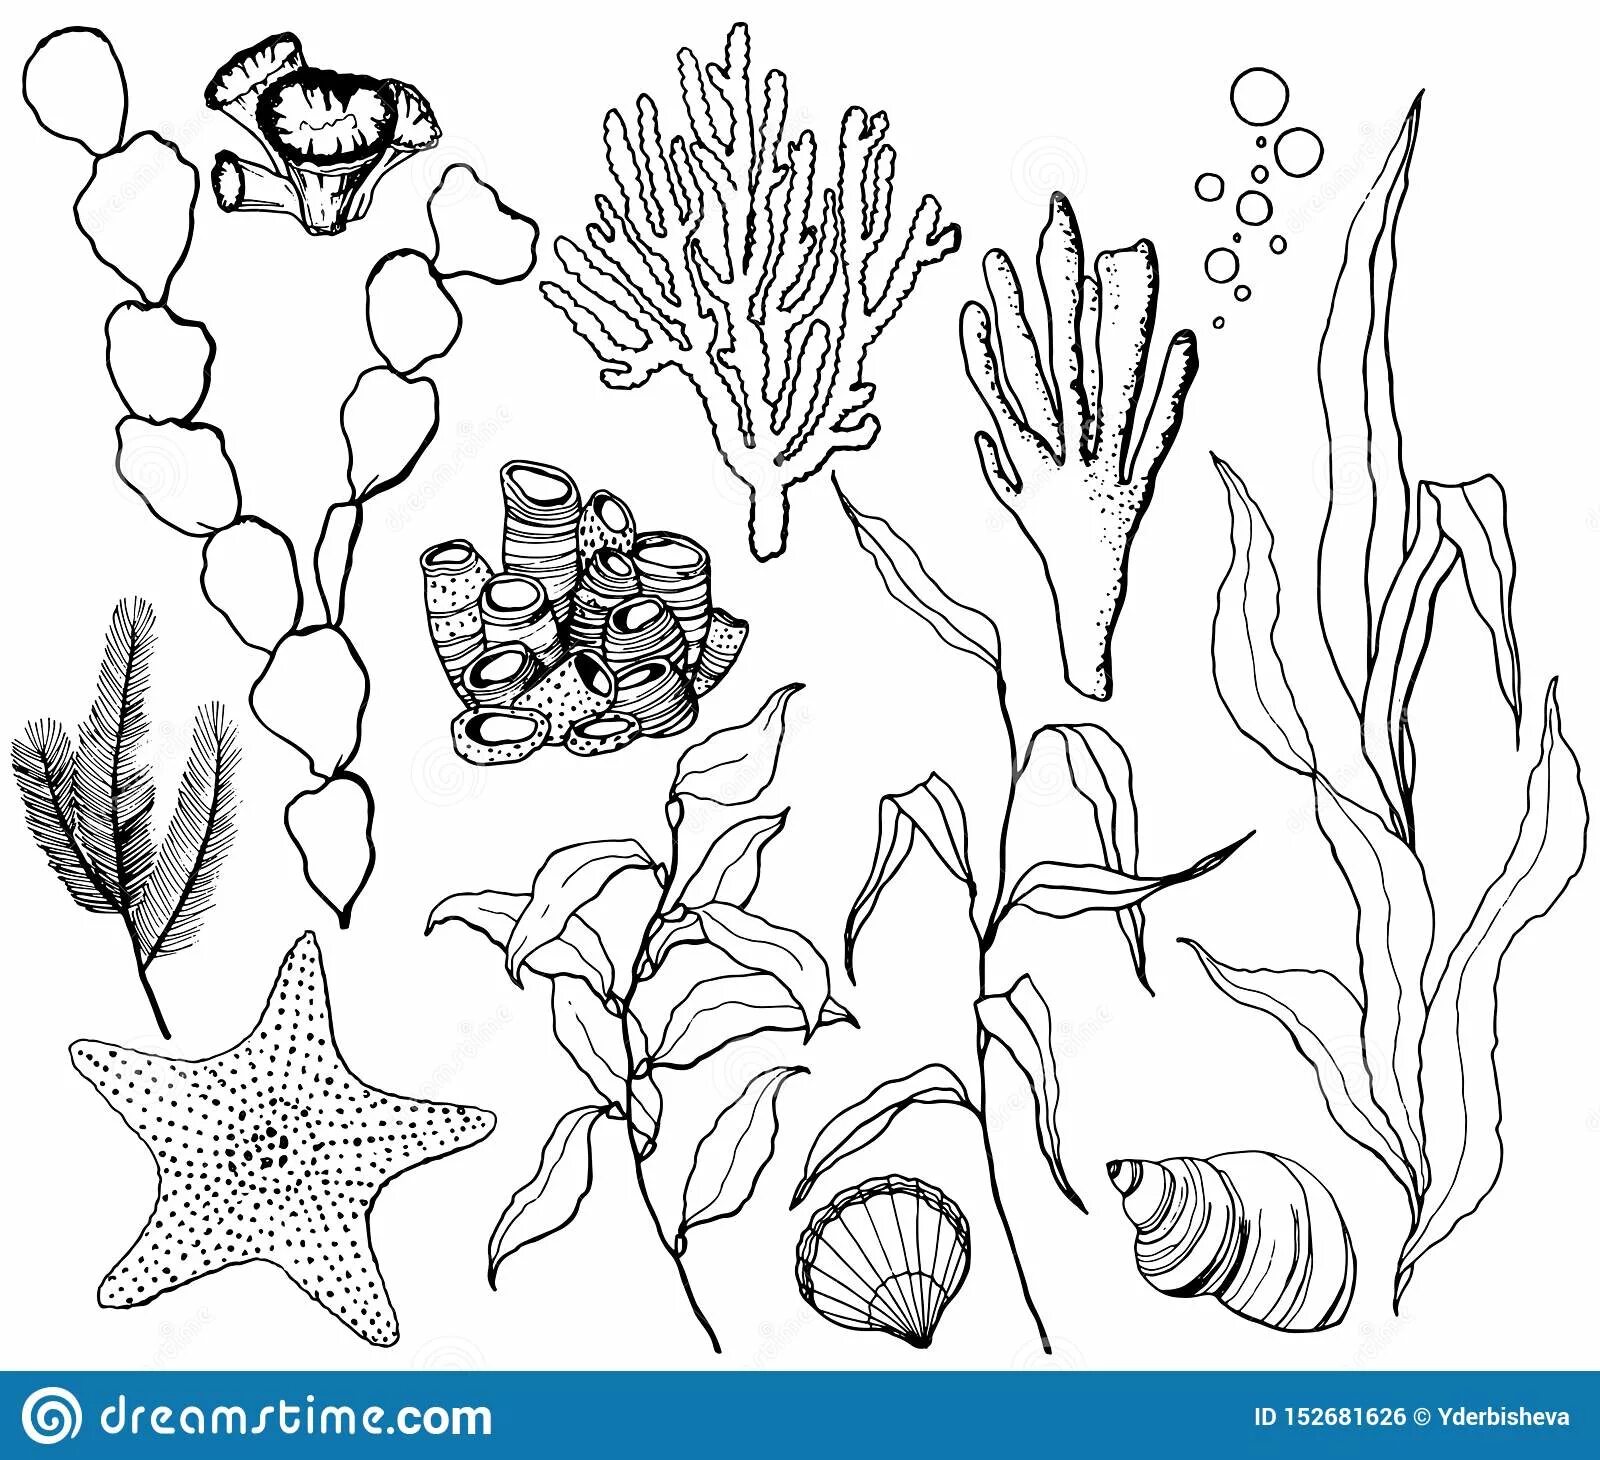 Coloring page magnanimous coral reef